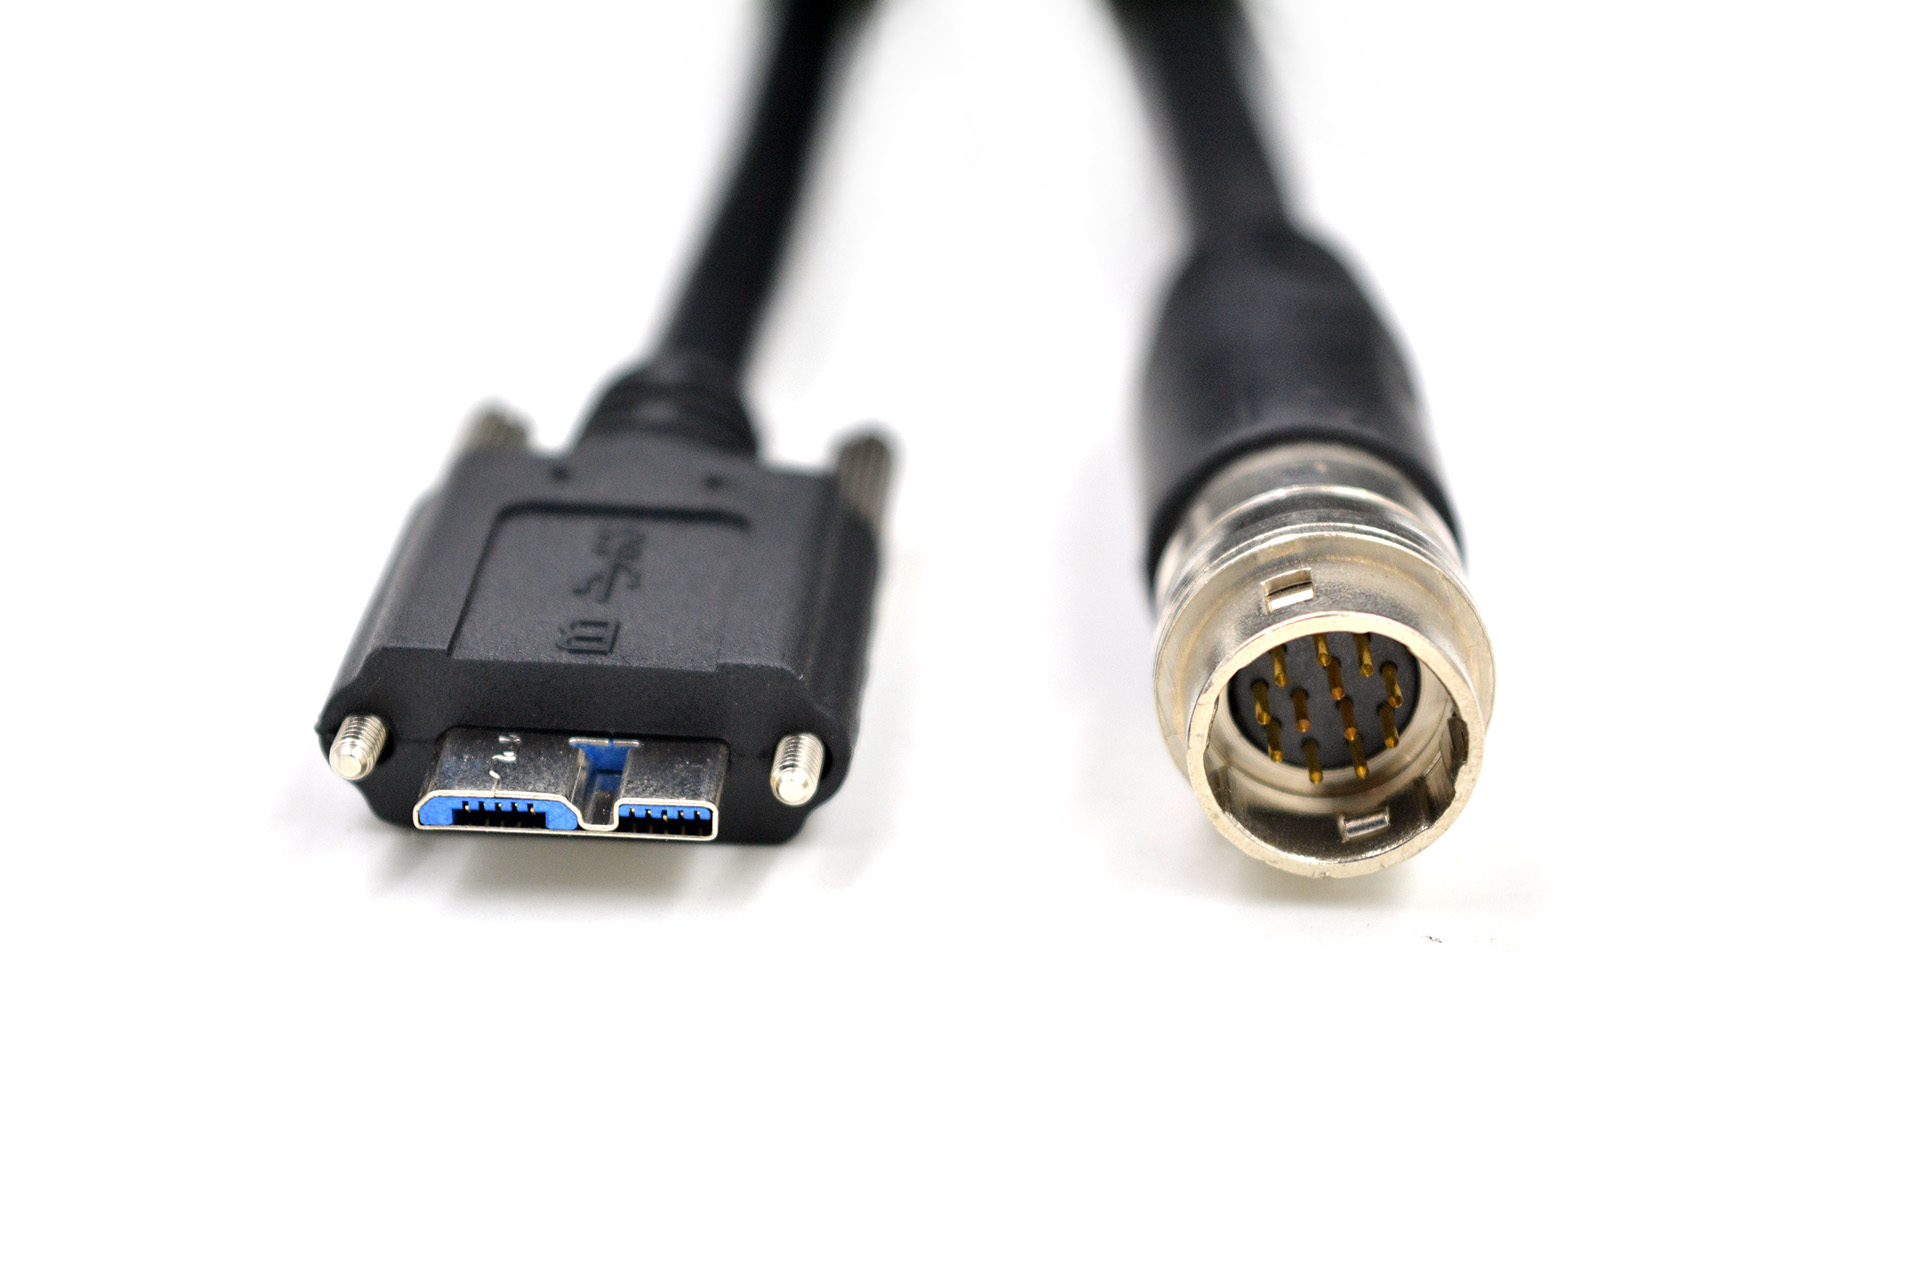 USB3.0 and Hirose 12P composed cables